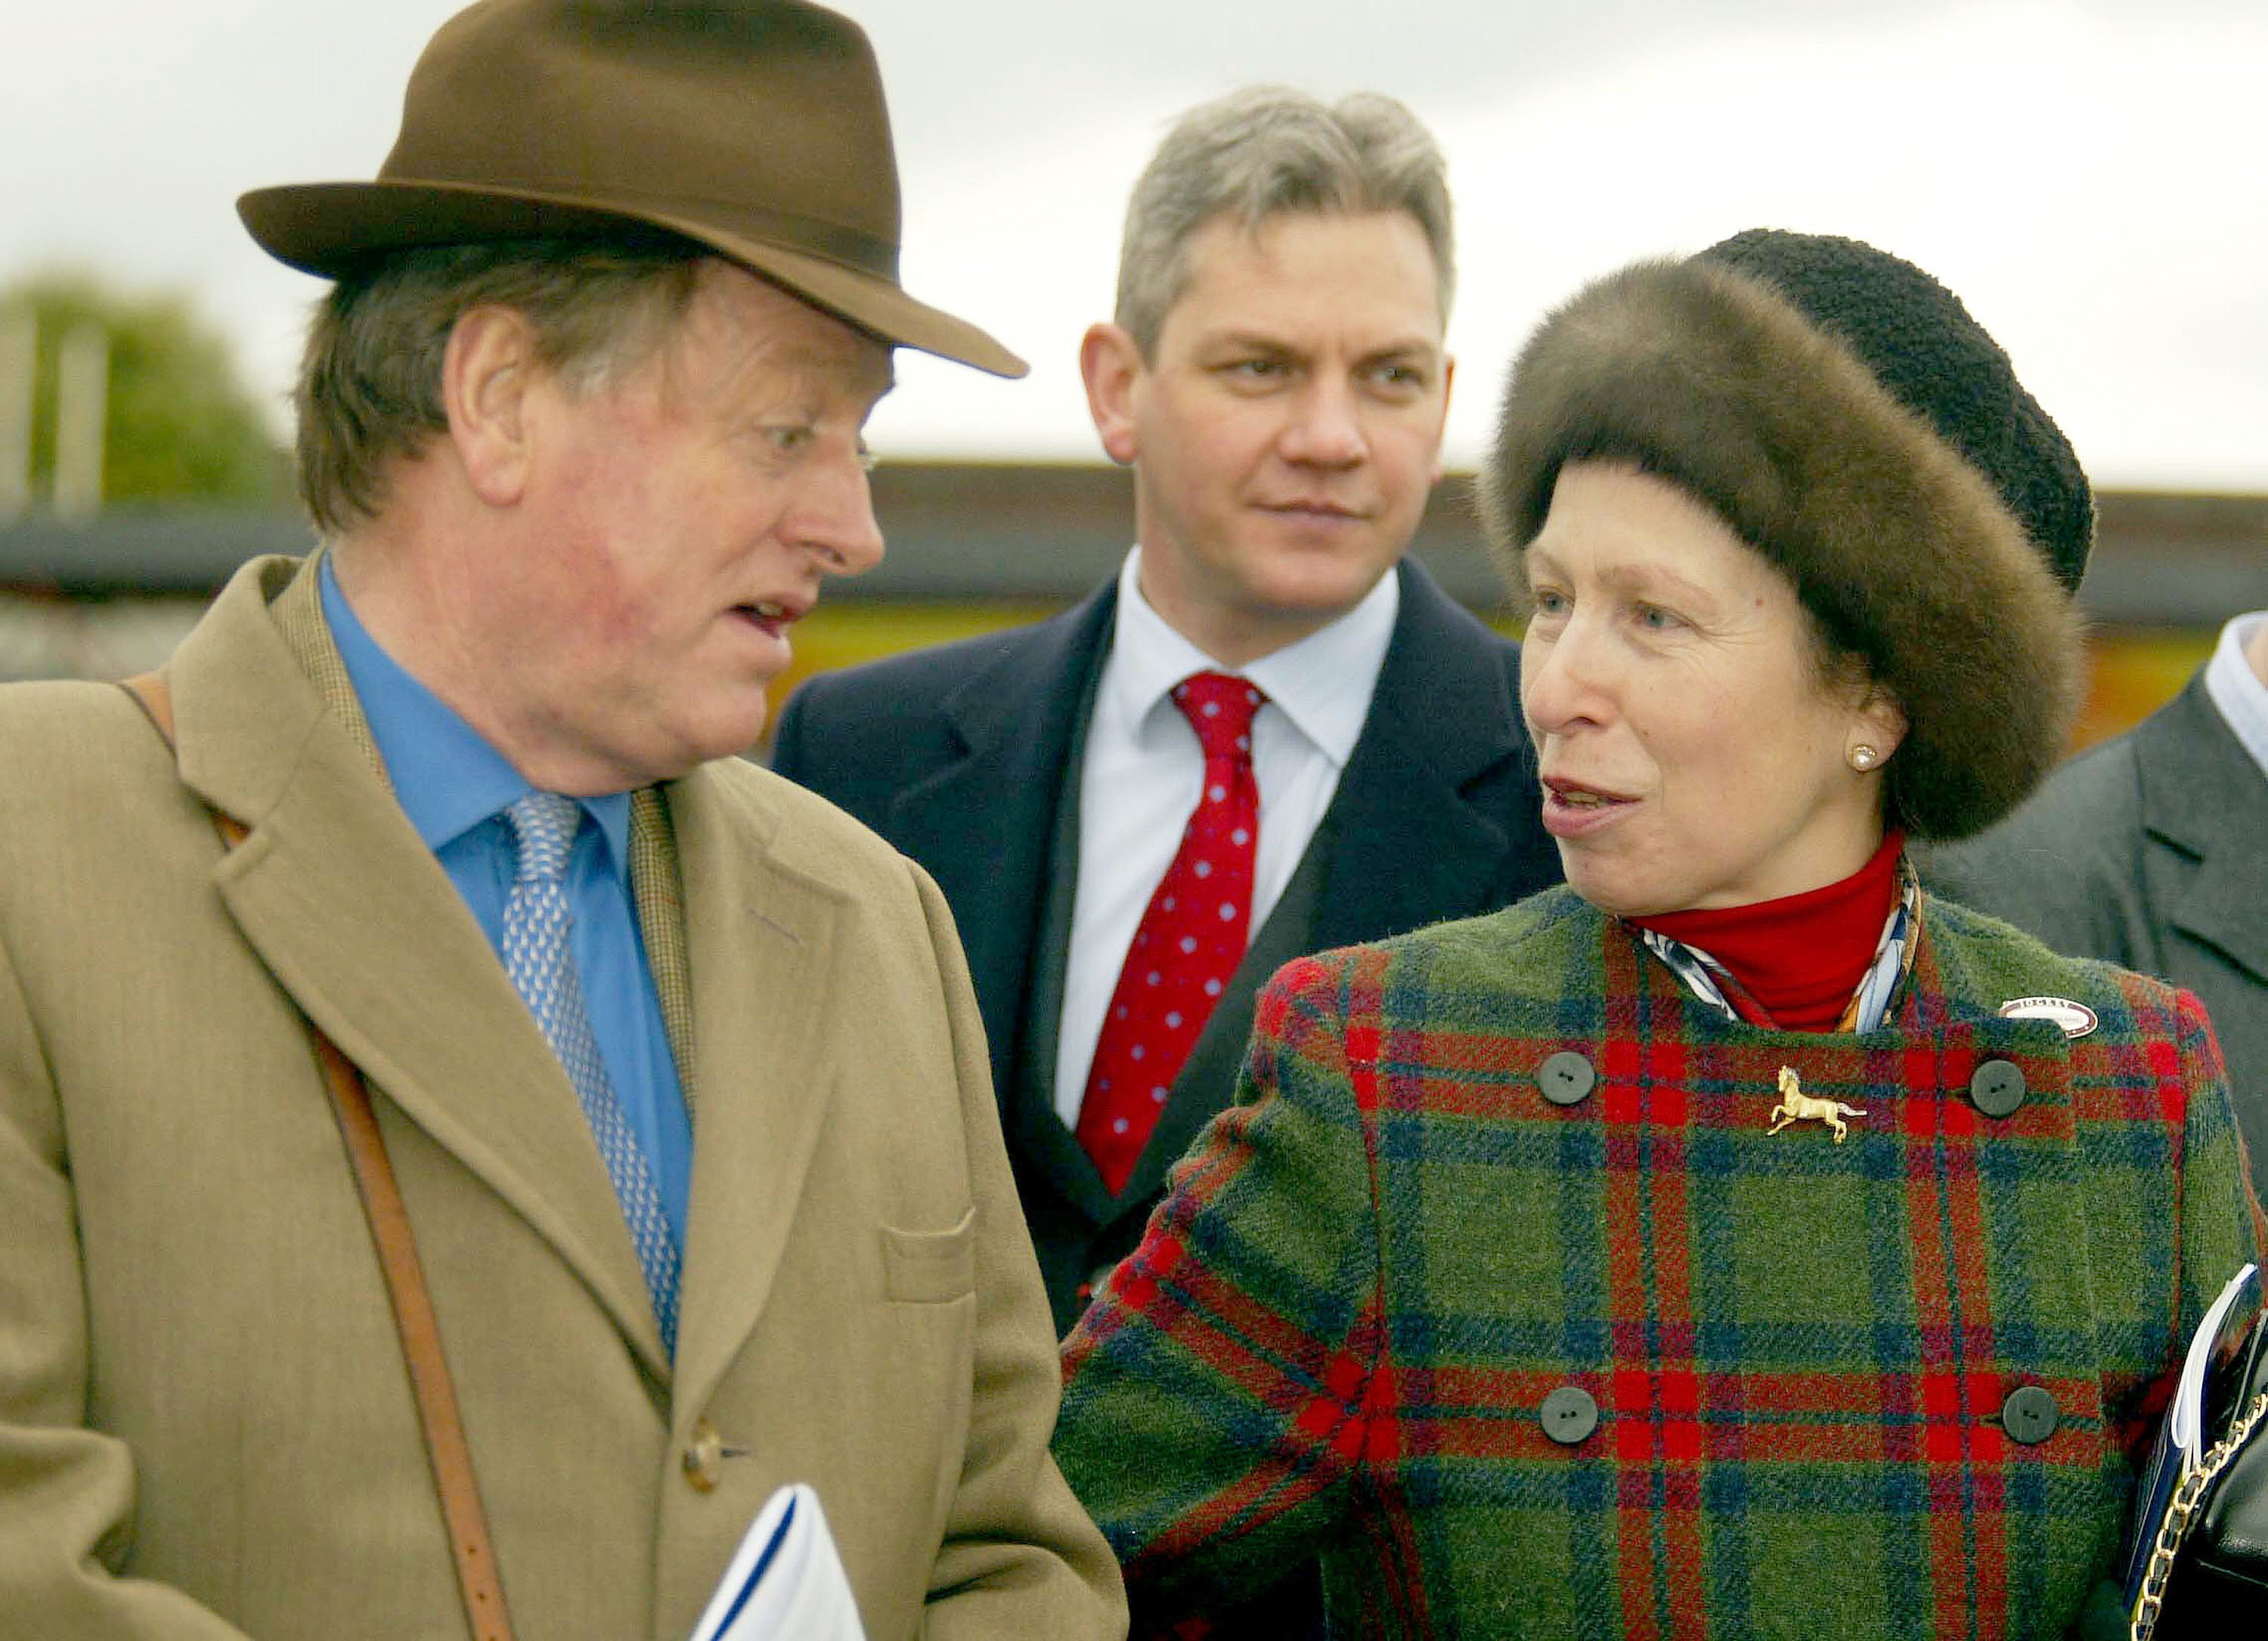 Princess Anne & Andrew Parker Bowles at the Cheltenham Gold Cup on March 18, 2004, in Cheltenham, England | Photo: Getty Images